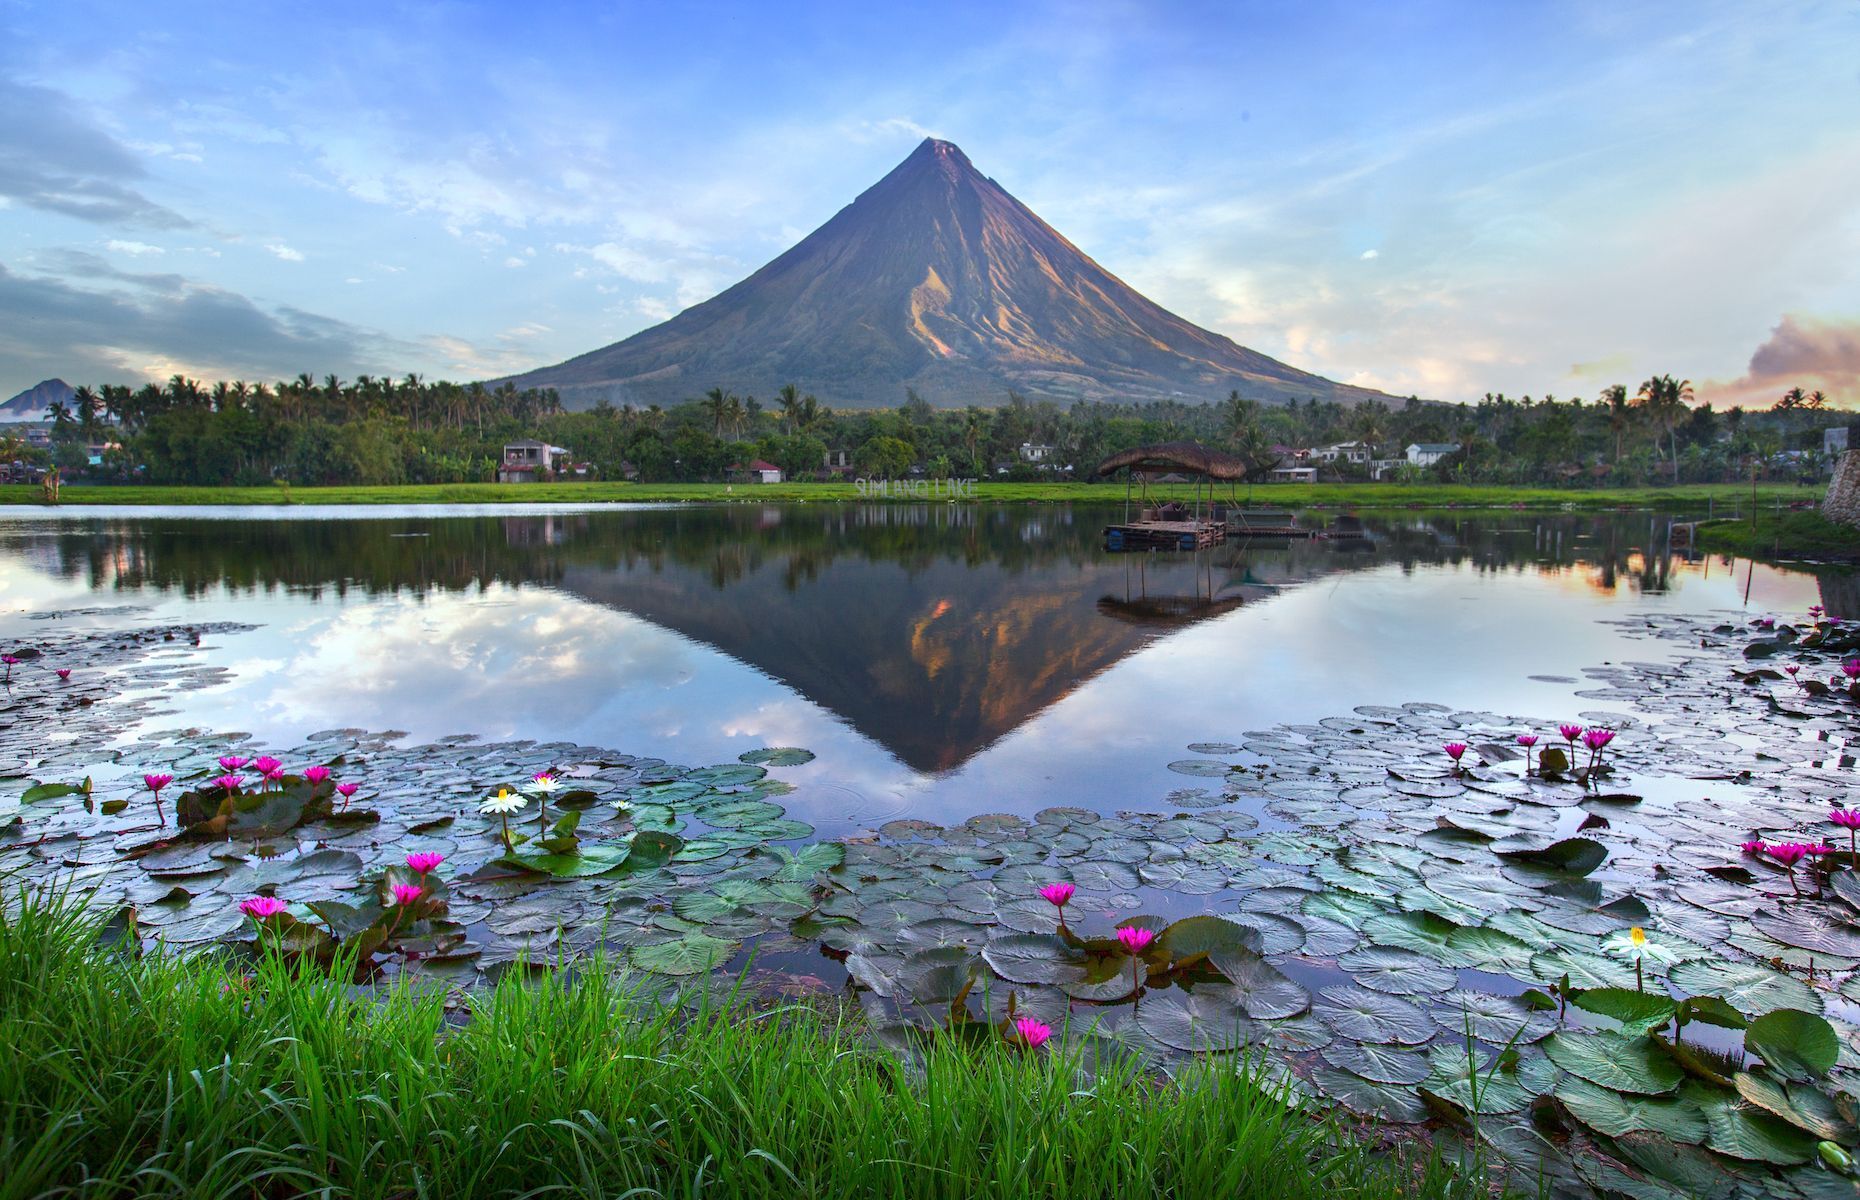 <p>Nature lovers are in for a treat when they visit the Philippines’ <a href="https://www.universal-traveller.com/11-best-things-to-do-in-bicol-philippines/" class="atom_link atom_valid" rel="noreferrer noopener">Bicol</a> region and its imposing, majestic Mayon volcano between December and April. Seashore lovers will appreciate the palm-fringed beaches of Caramoan and Donsol, famous for whale shark sightings. Travellers can also explore the Calaguas Caves and hike through a rainforest.</p>